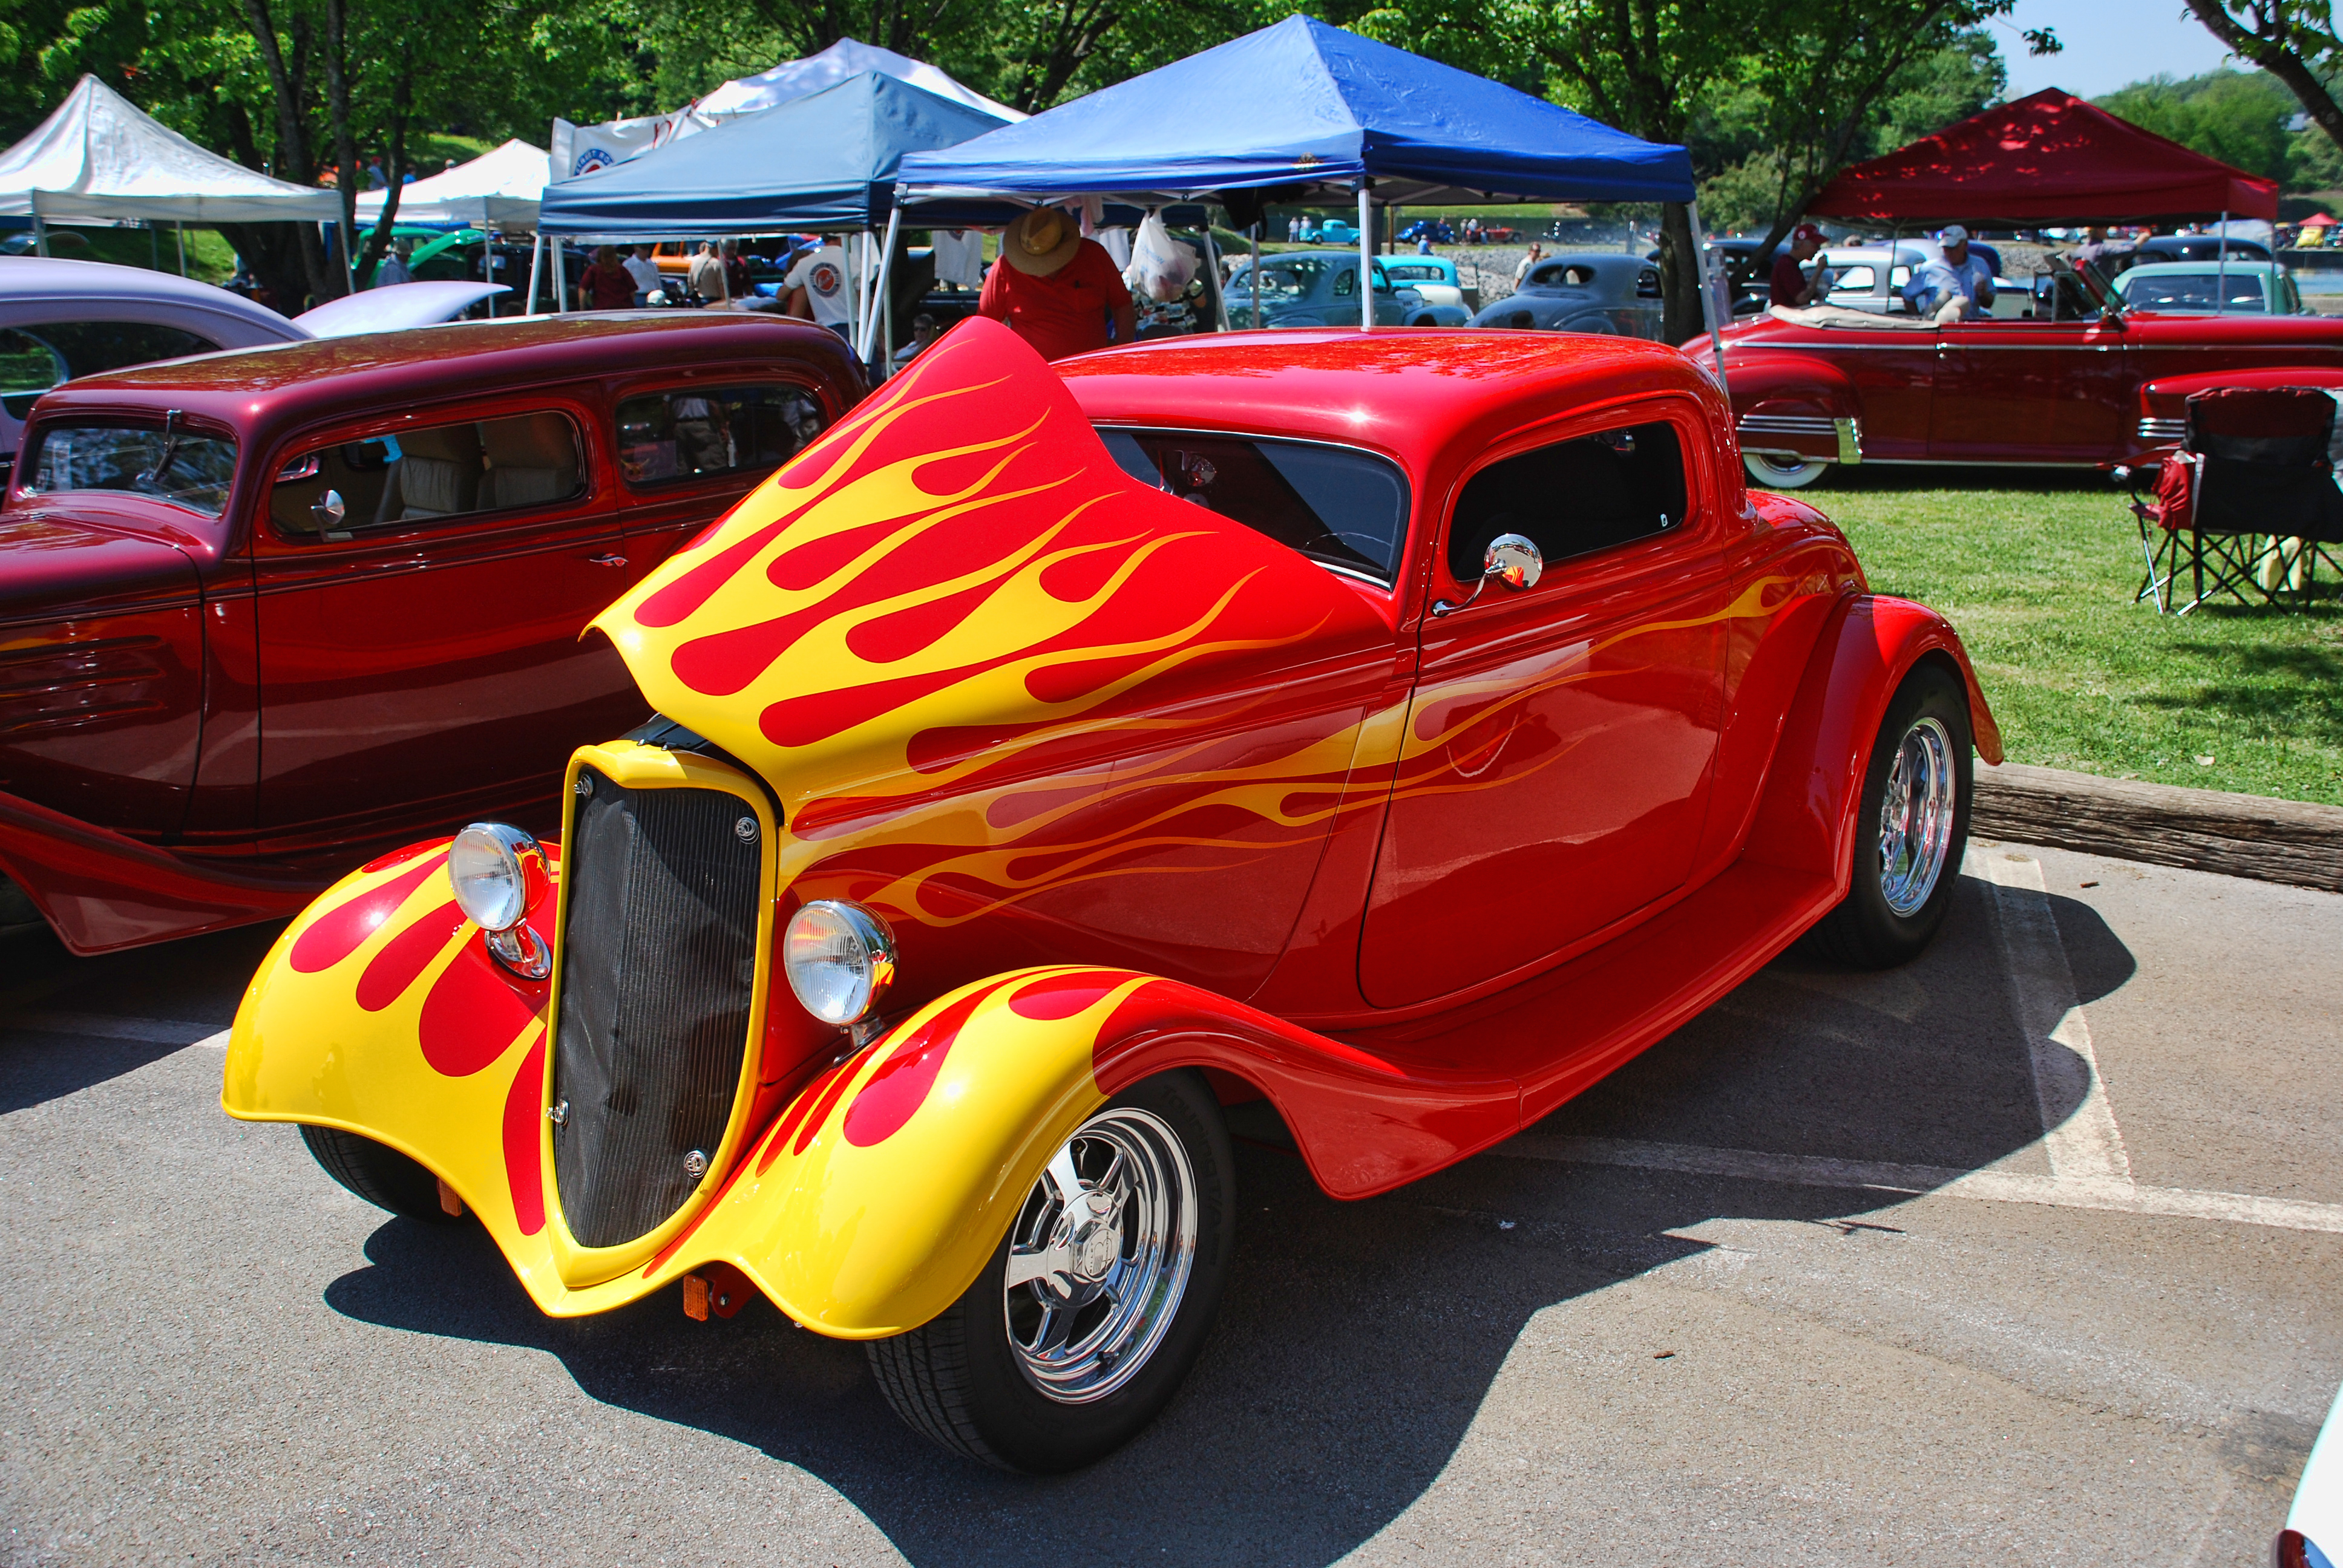 Event Alert: NSRA Street Rod Nationals South In Knoxville, May 1-3